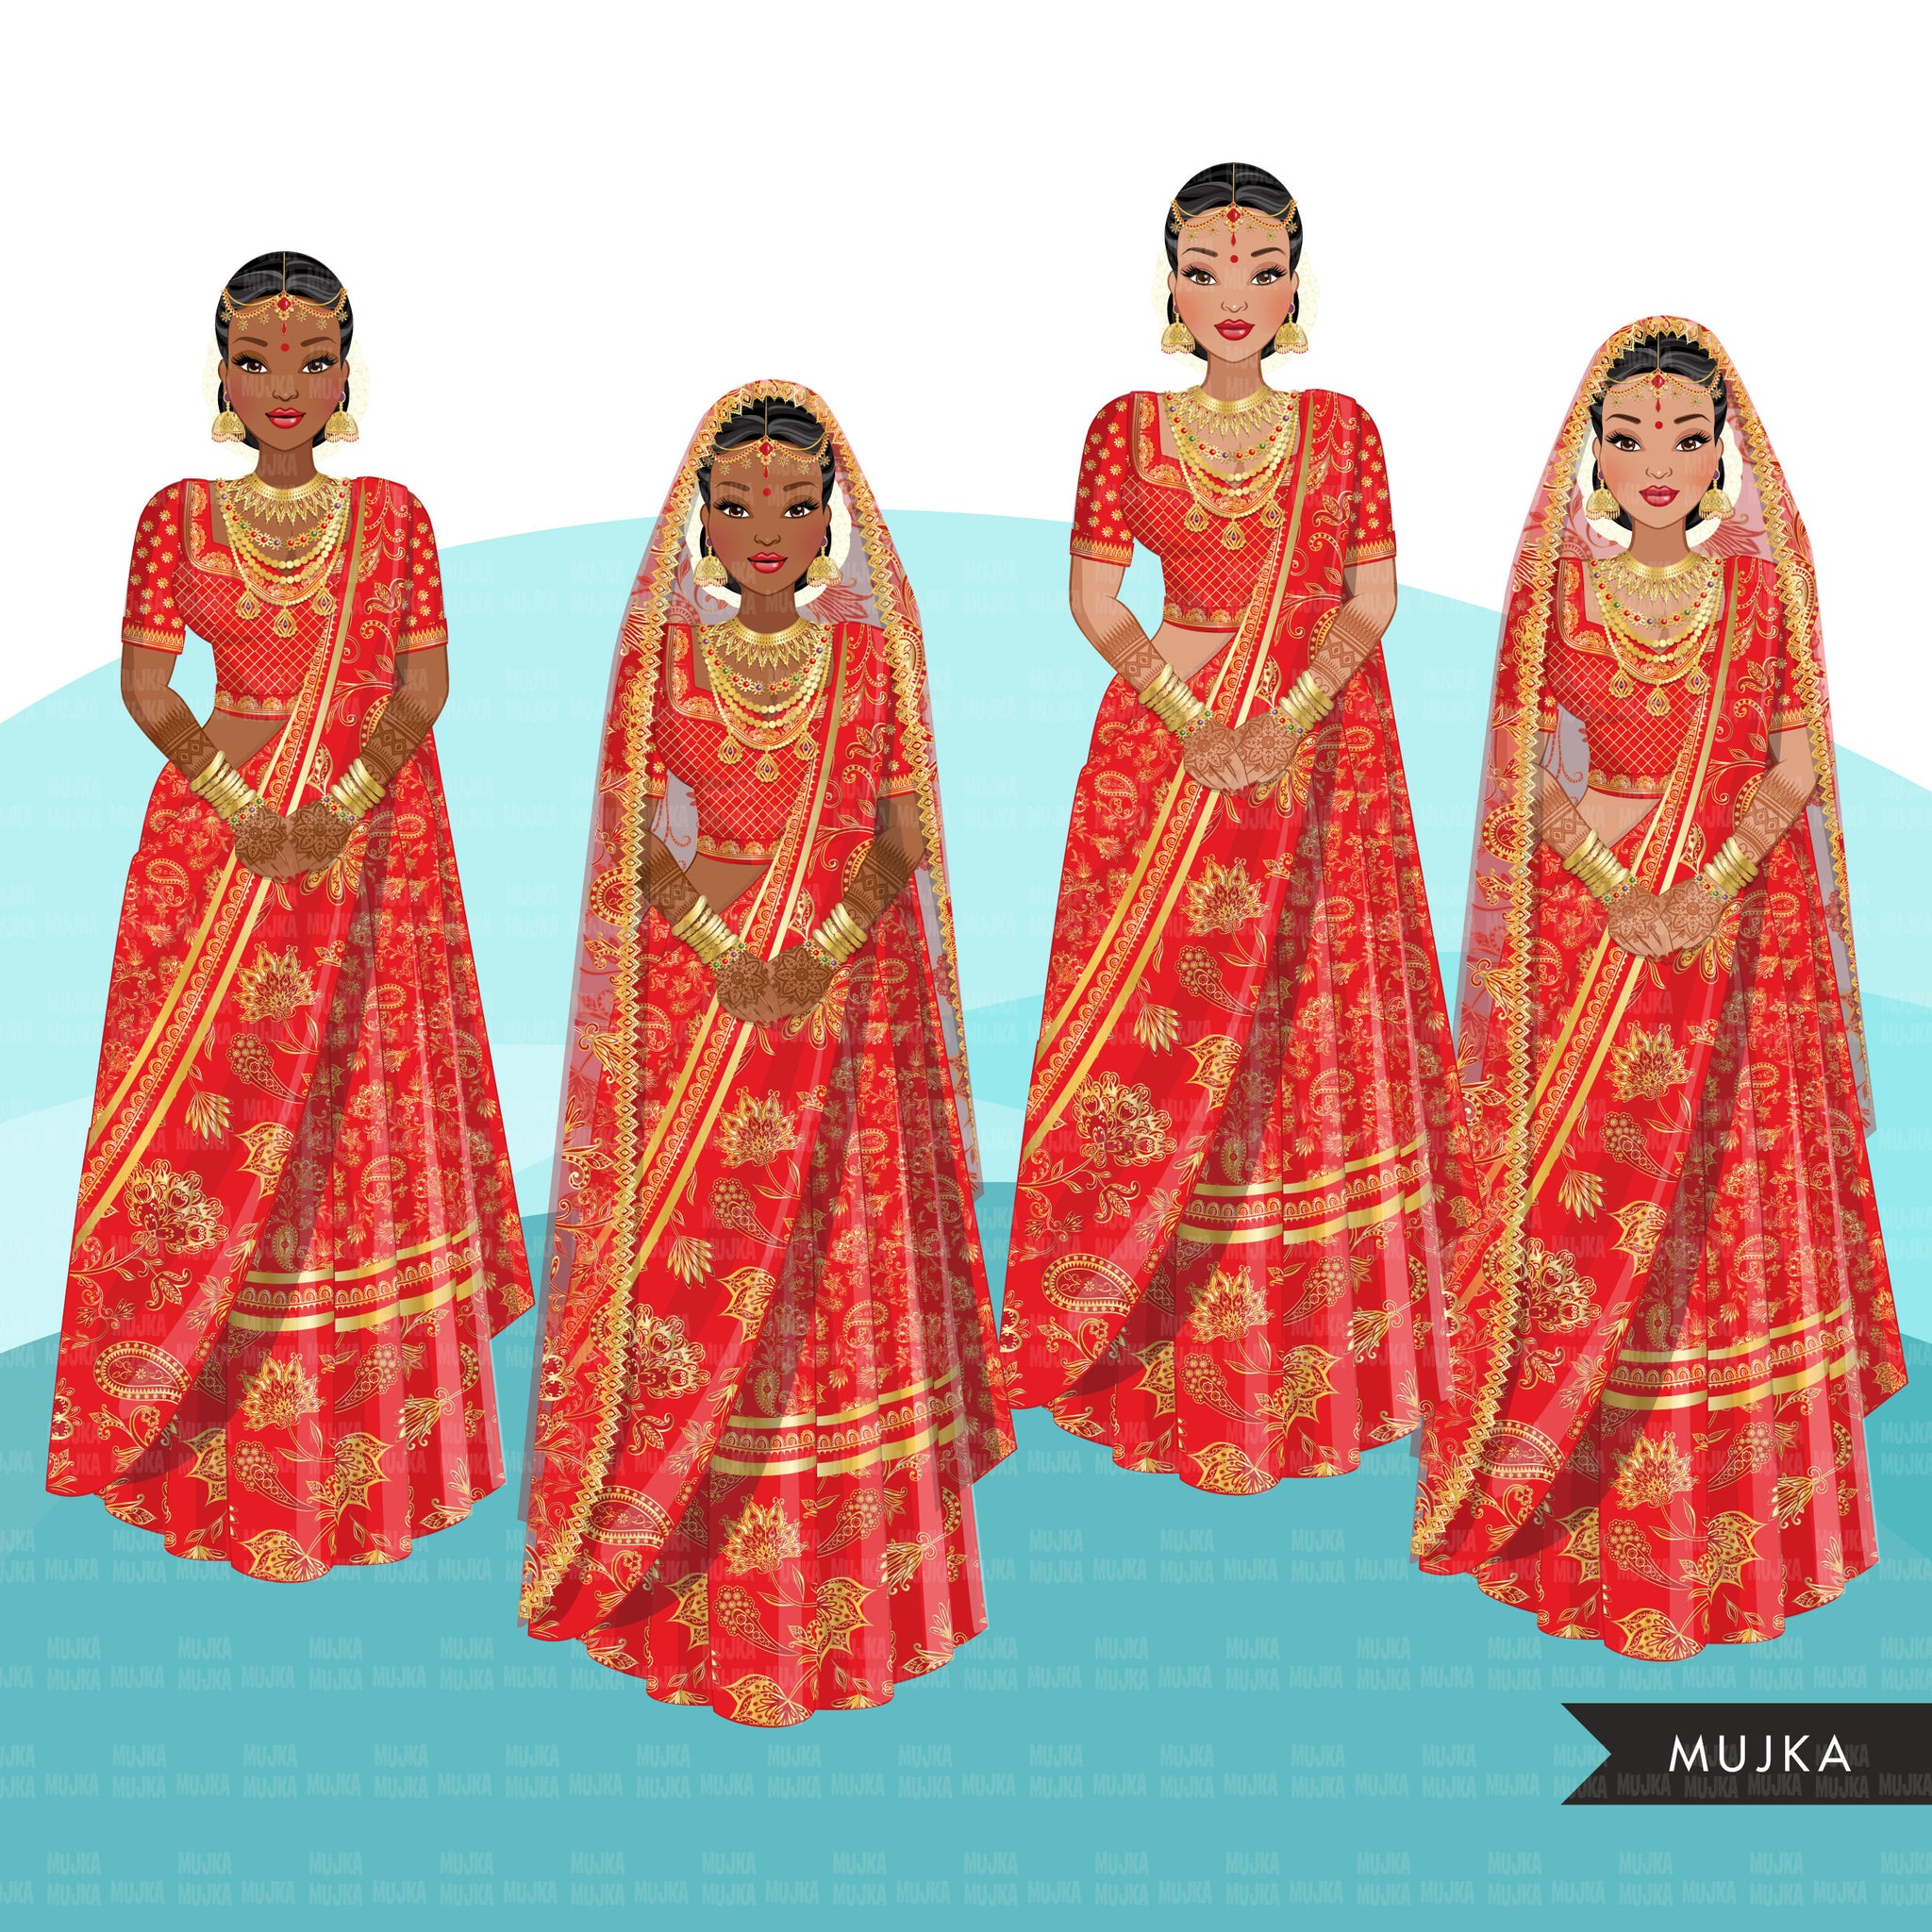 Indian bride clipart, Indian wedding dress, Indian wedding red backgro –  MUJKA CLIPARTS